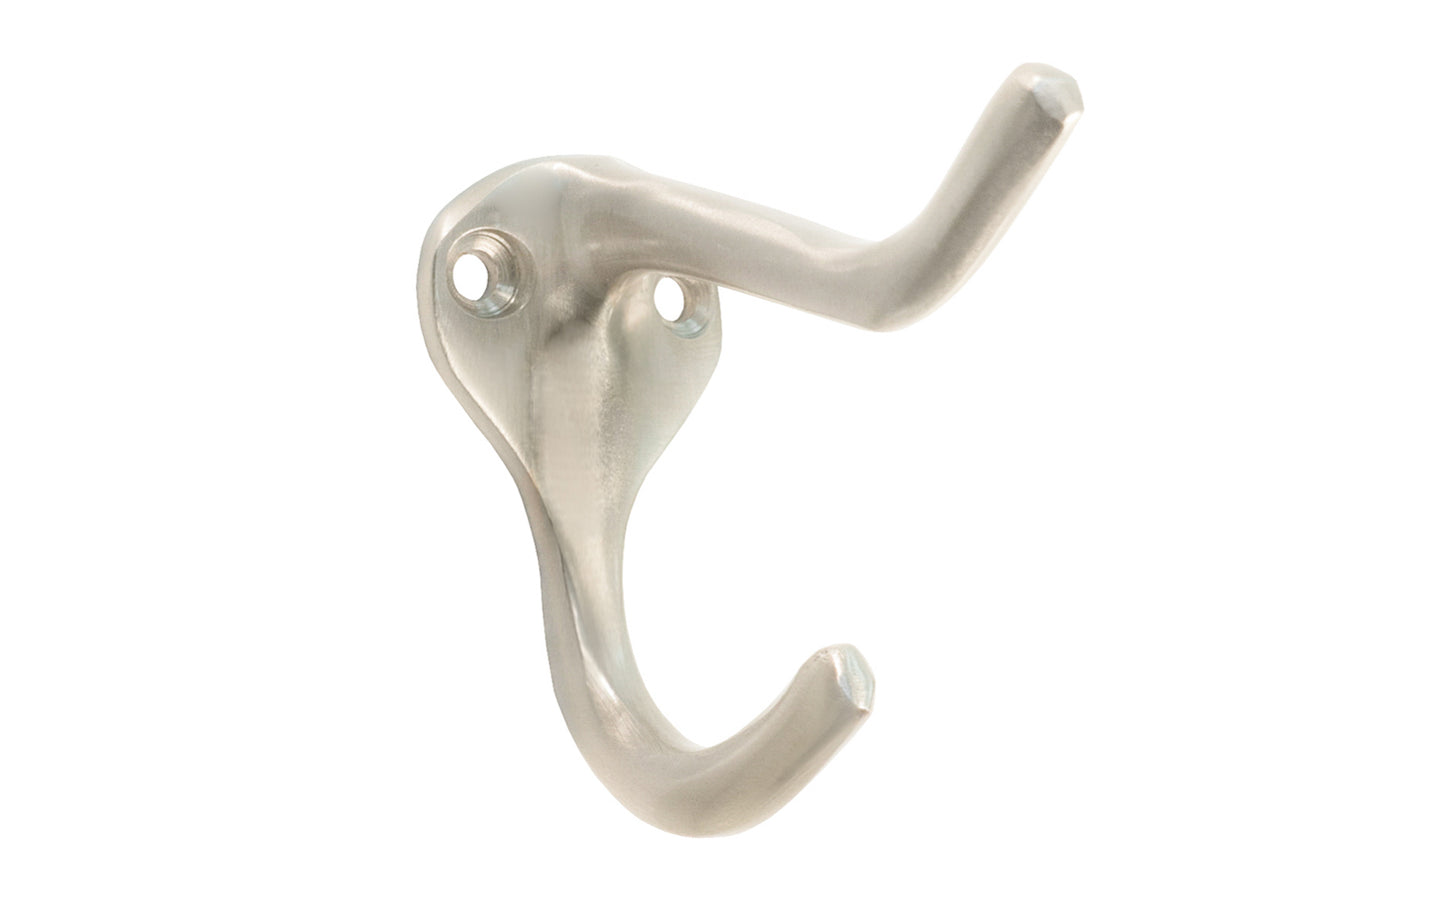 Ives Solid Brass Double Hook. Great for kitchens, bathrooms, hallways, furniture, cabinets, bedrooms. The two prong hook is made of solid brass material, making it durable for clothing, towels, bags. Hat & Coat Hook. Satin Nickel Finish.